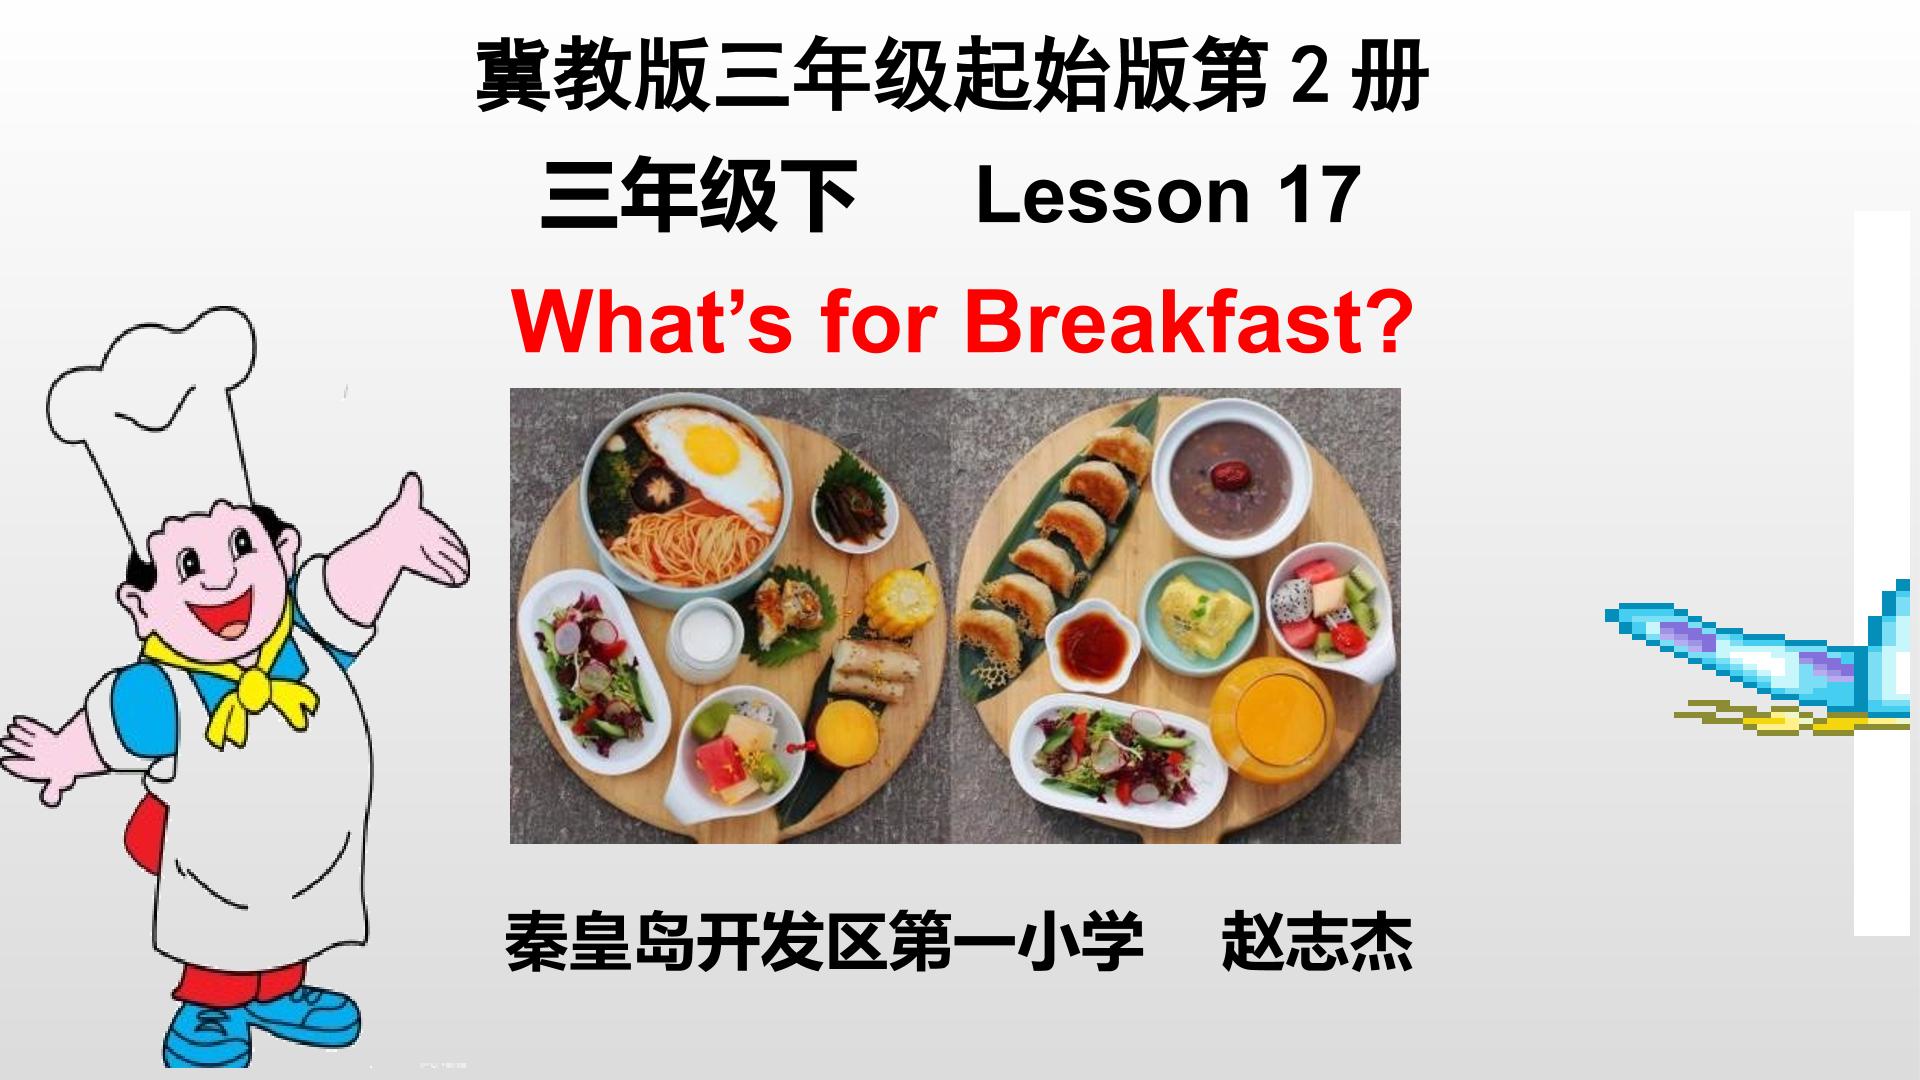 Lesson 17 What's for Breakfast